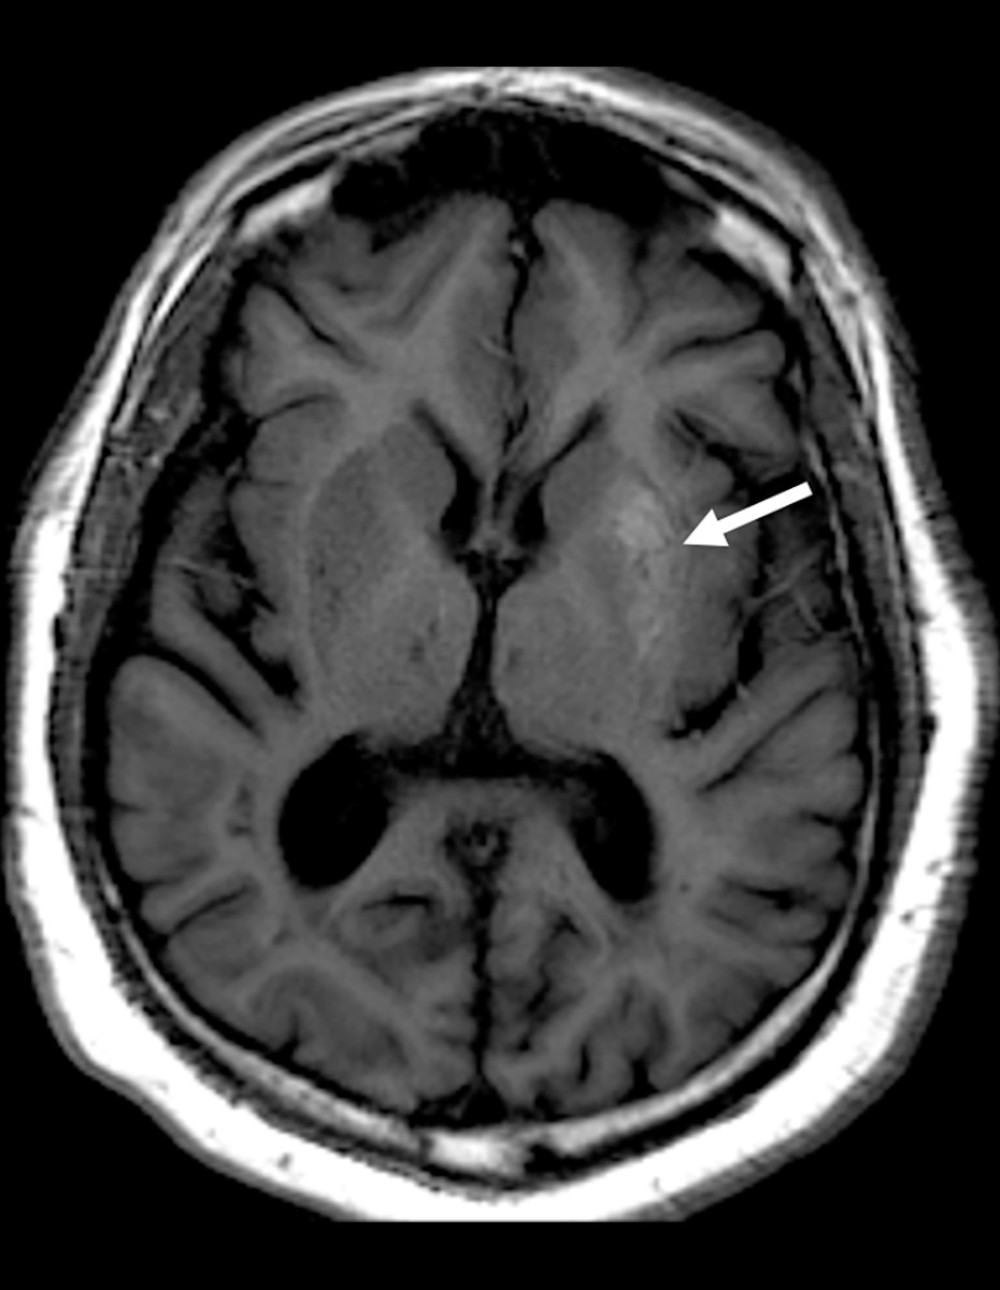 MRI head demonstrating diffuse T1 hyperintensity within the left lentiform nucleus (white arrow).